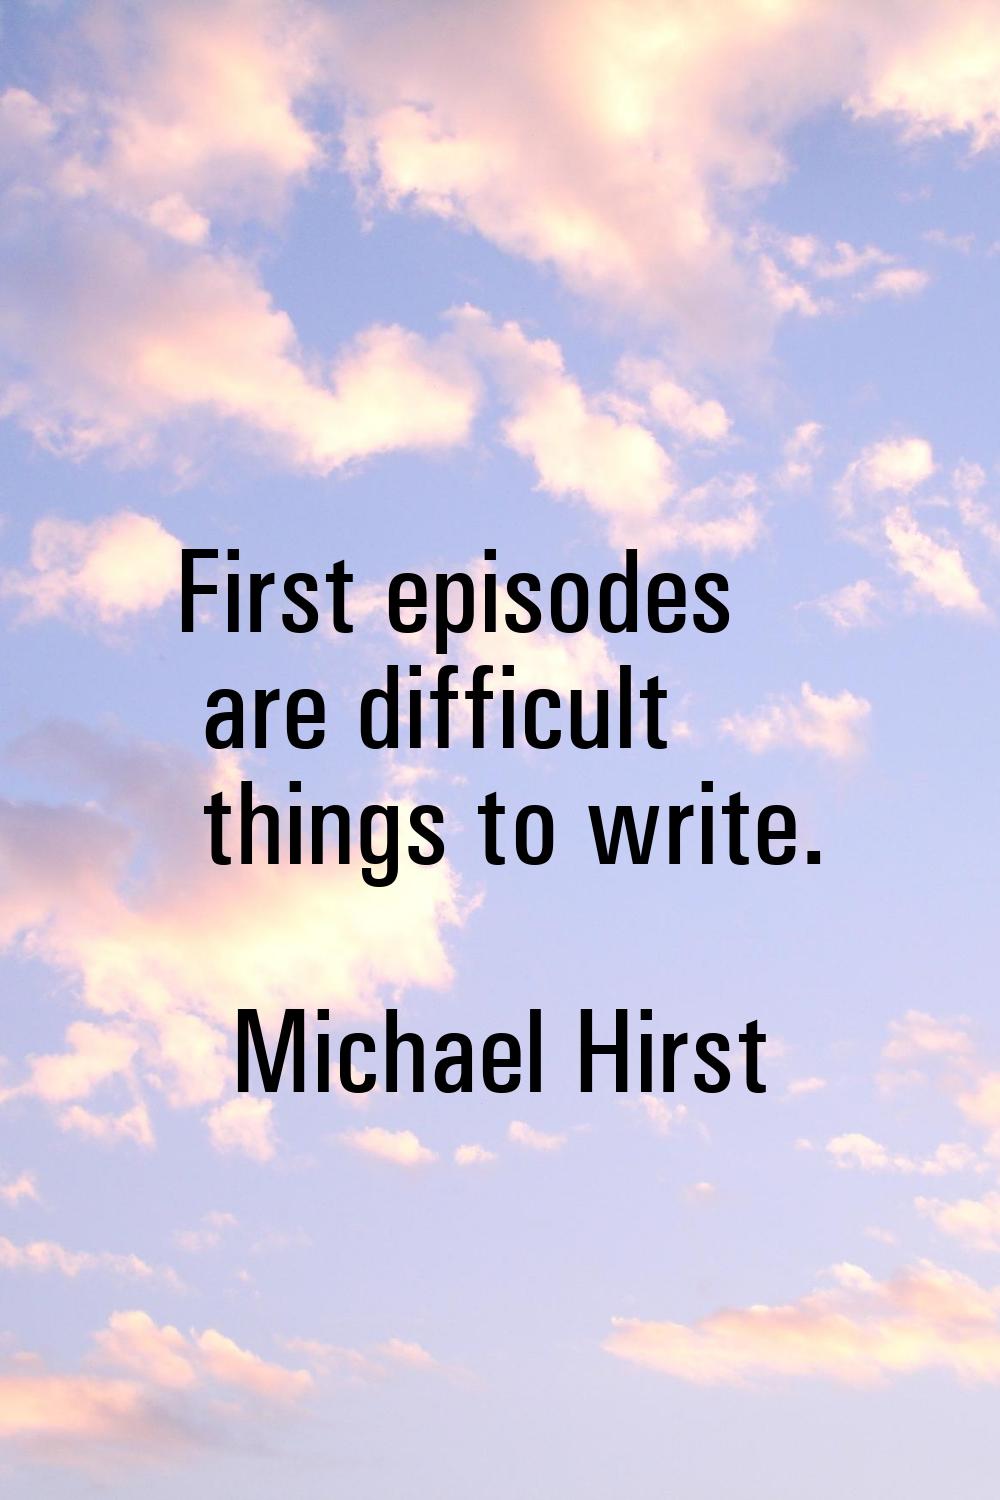 First episodes are difficult things to write.